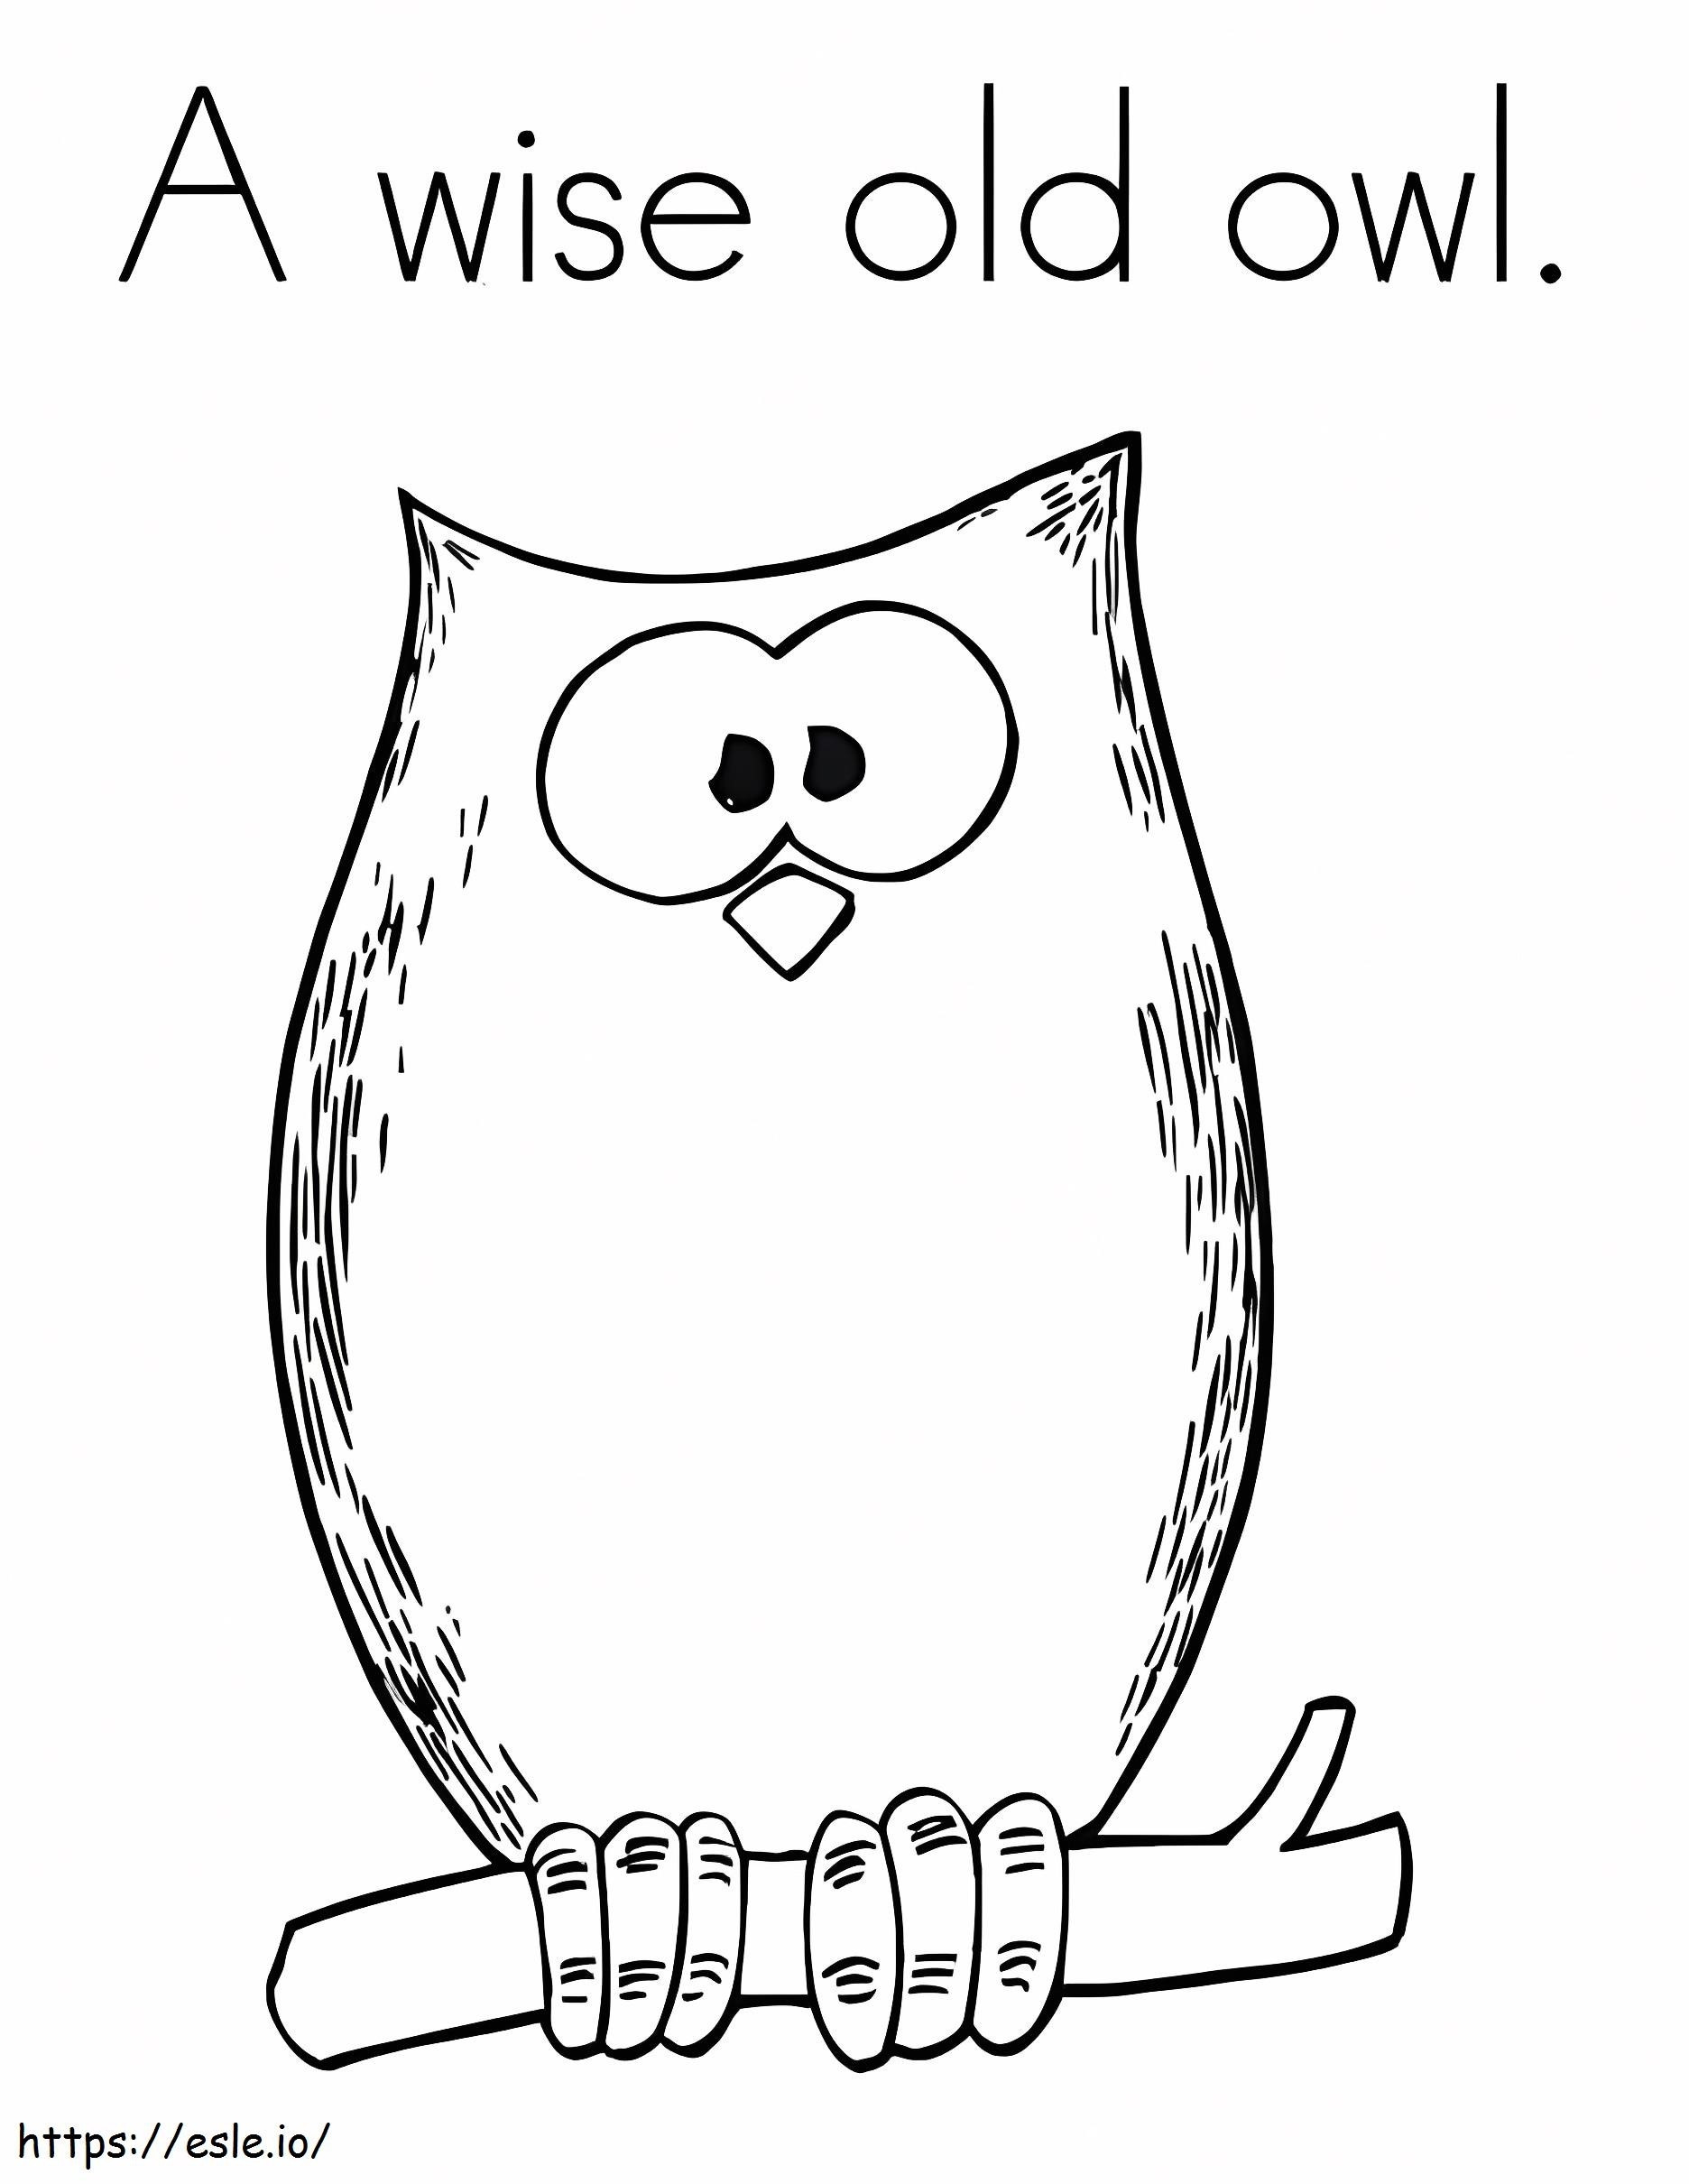 A Wise Old Owl coloring page